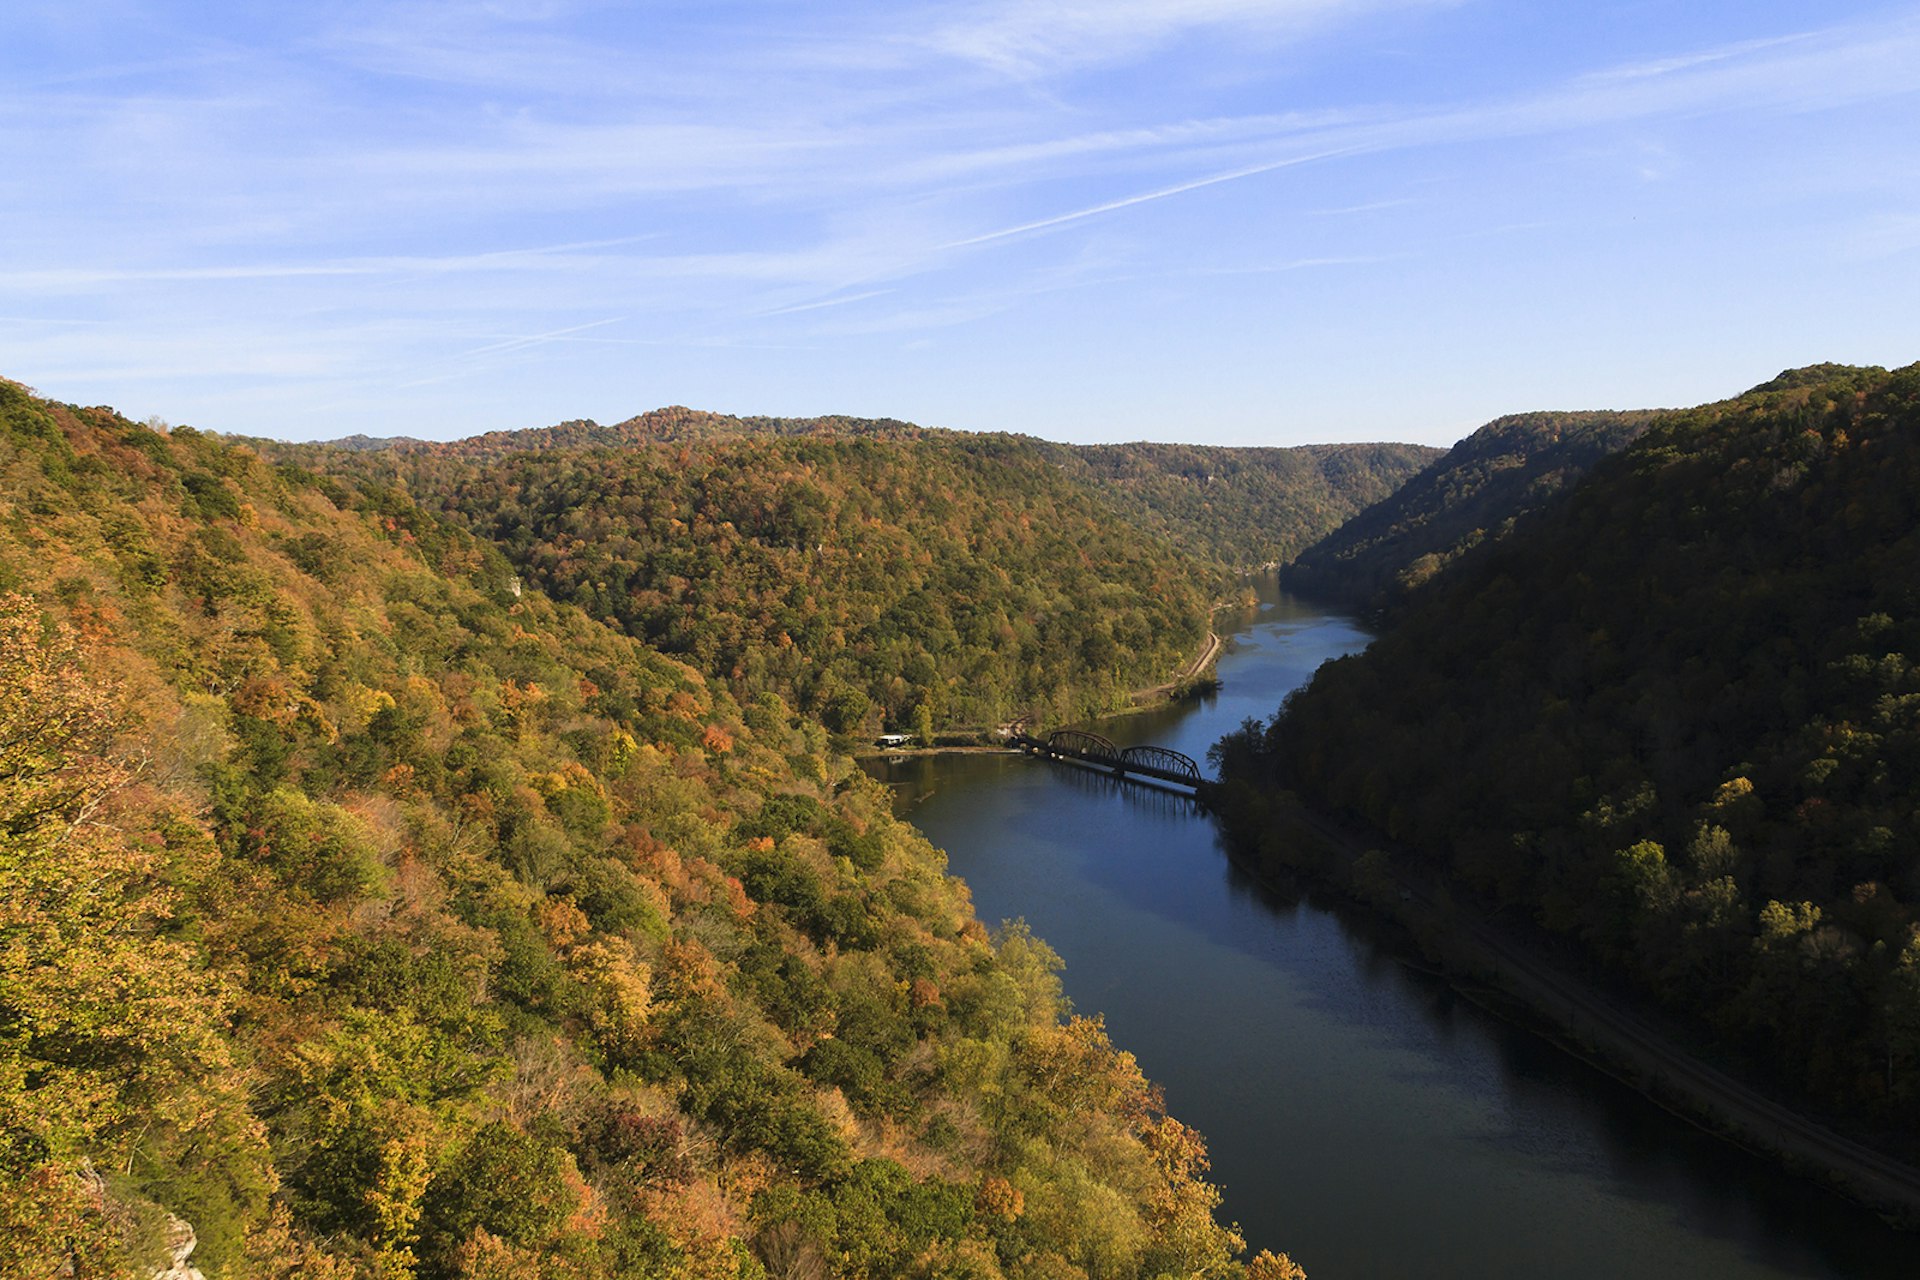 scenic overlook onto the New River Gorge